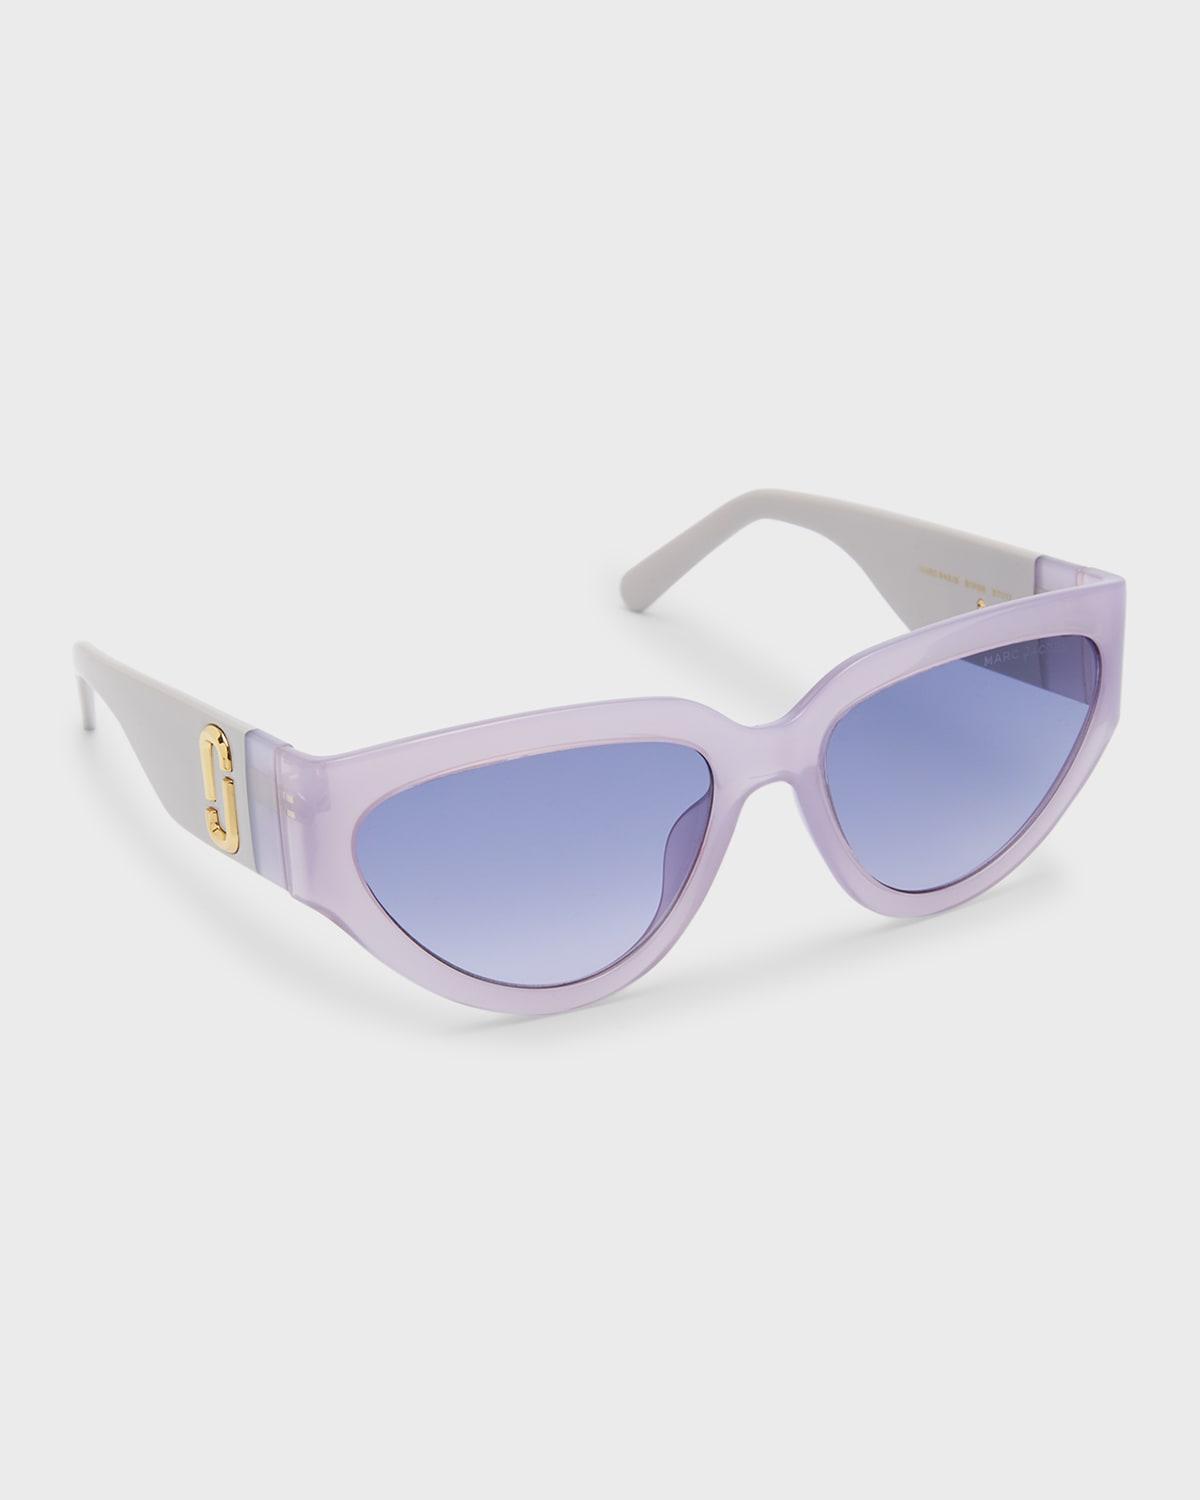 Marc Jacobs 57mm Cat Eye Sunglasses Product Image